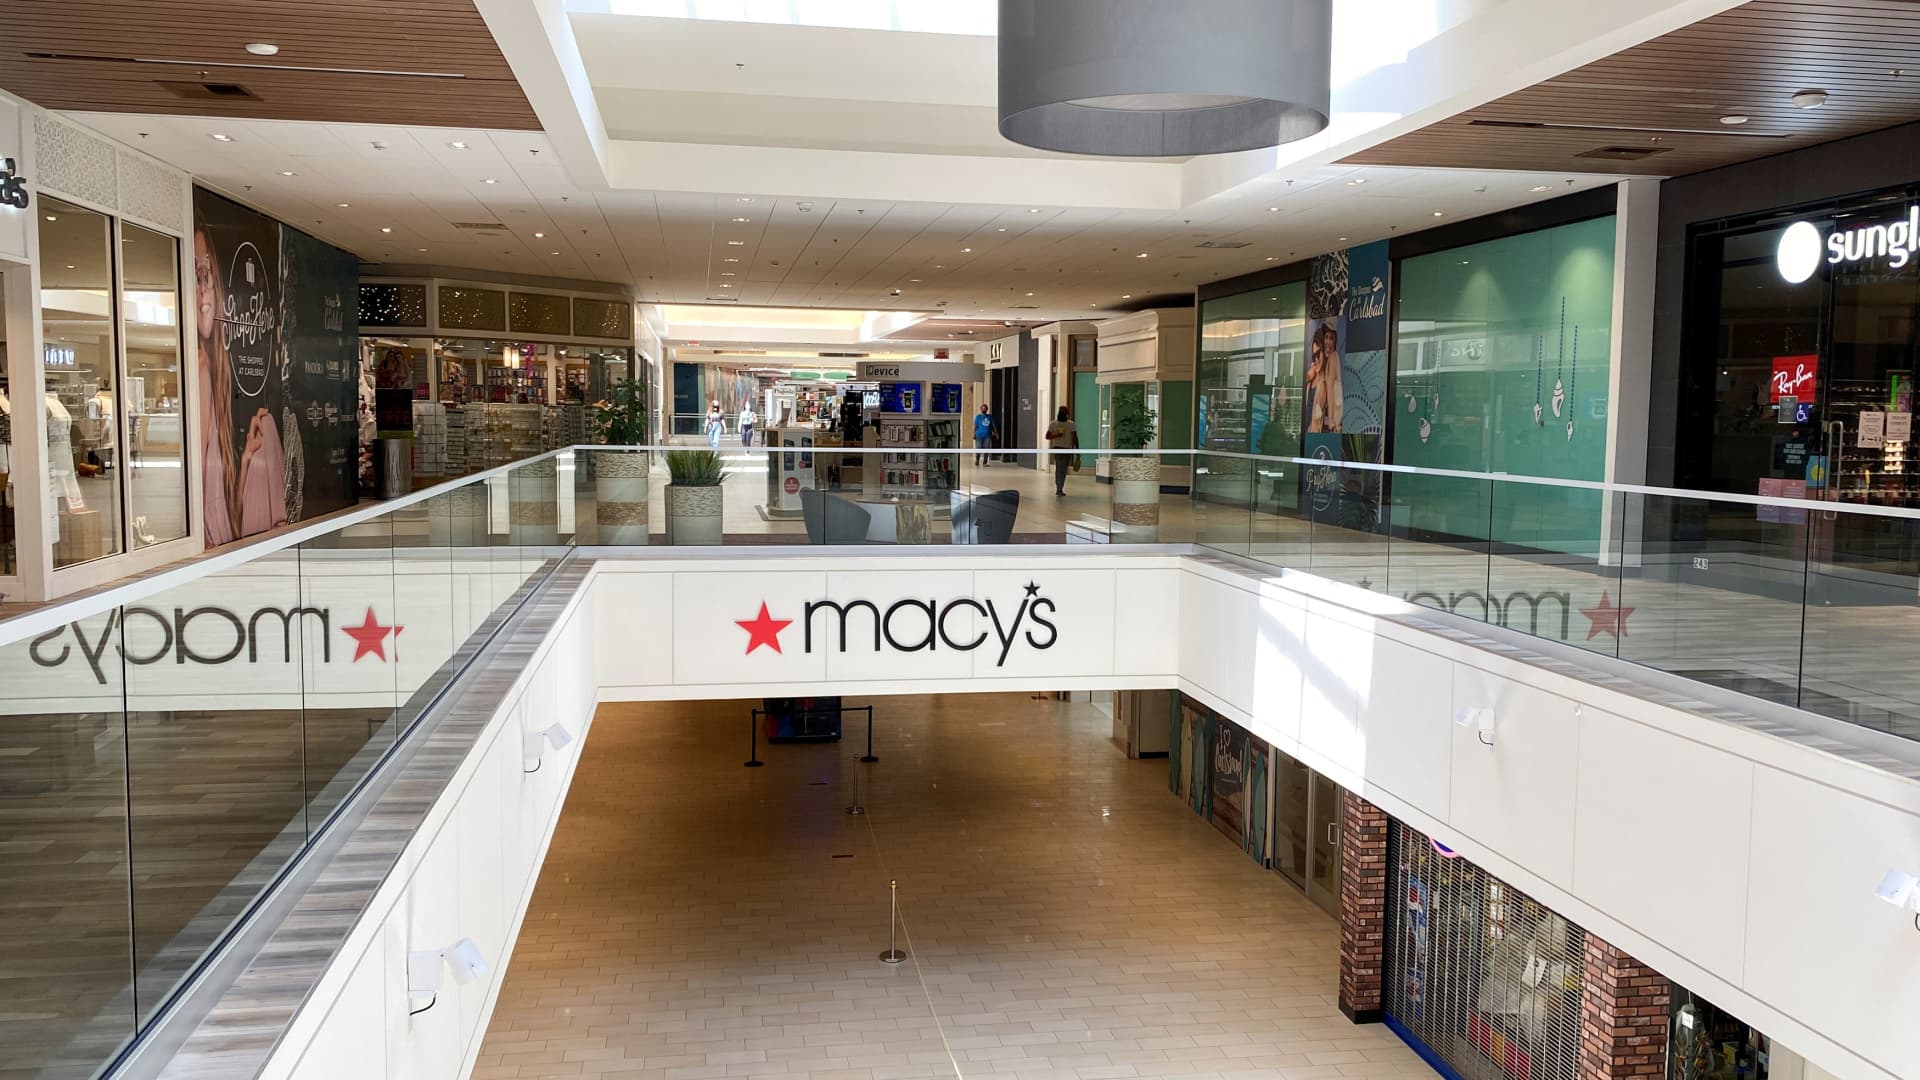 One of Macy's department stores locations at an indoor shopping mall.